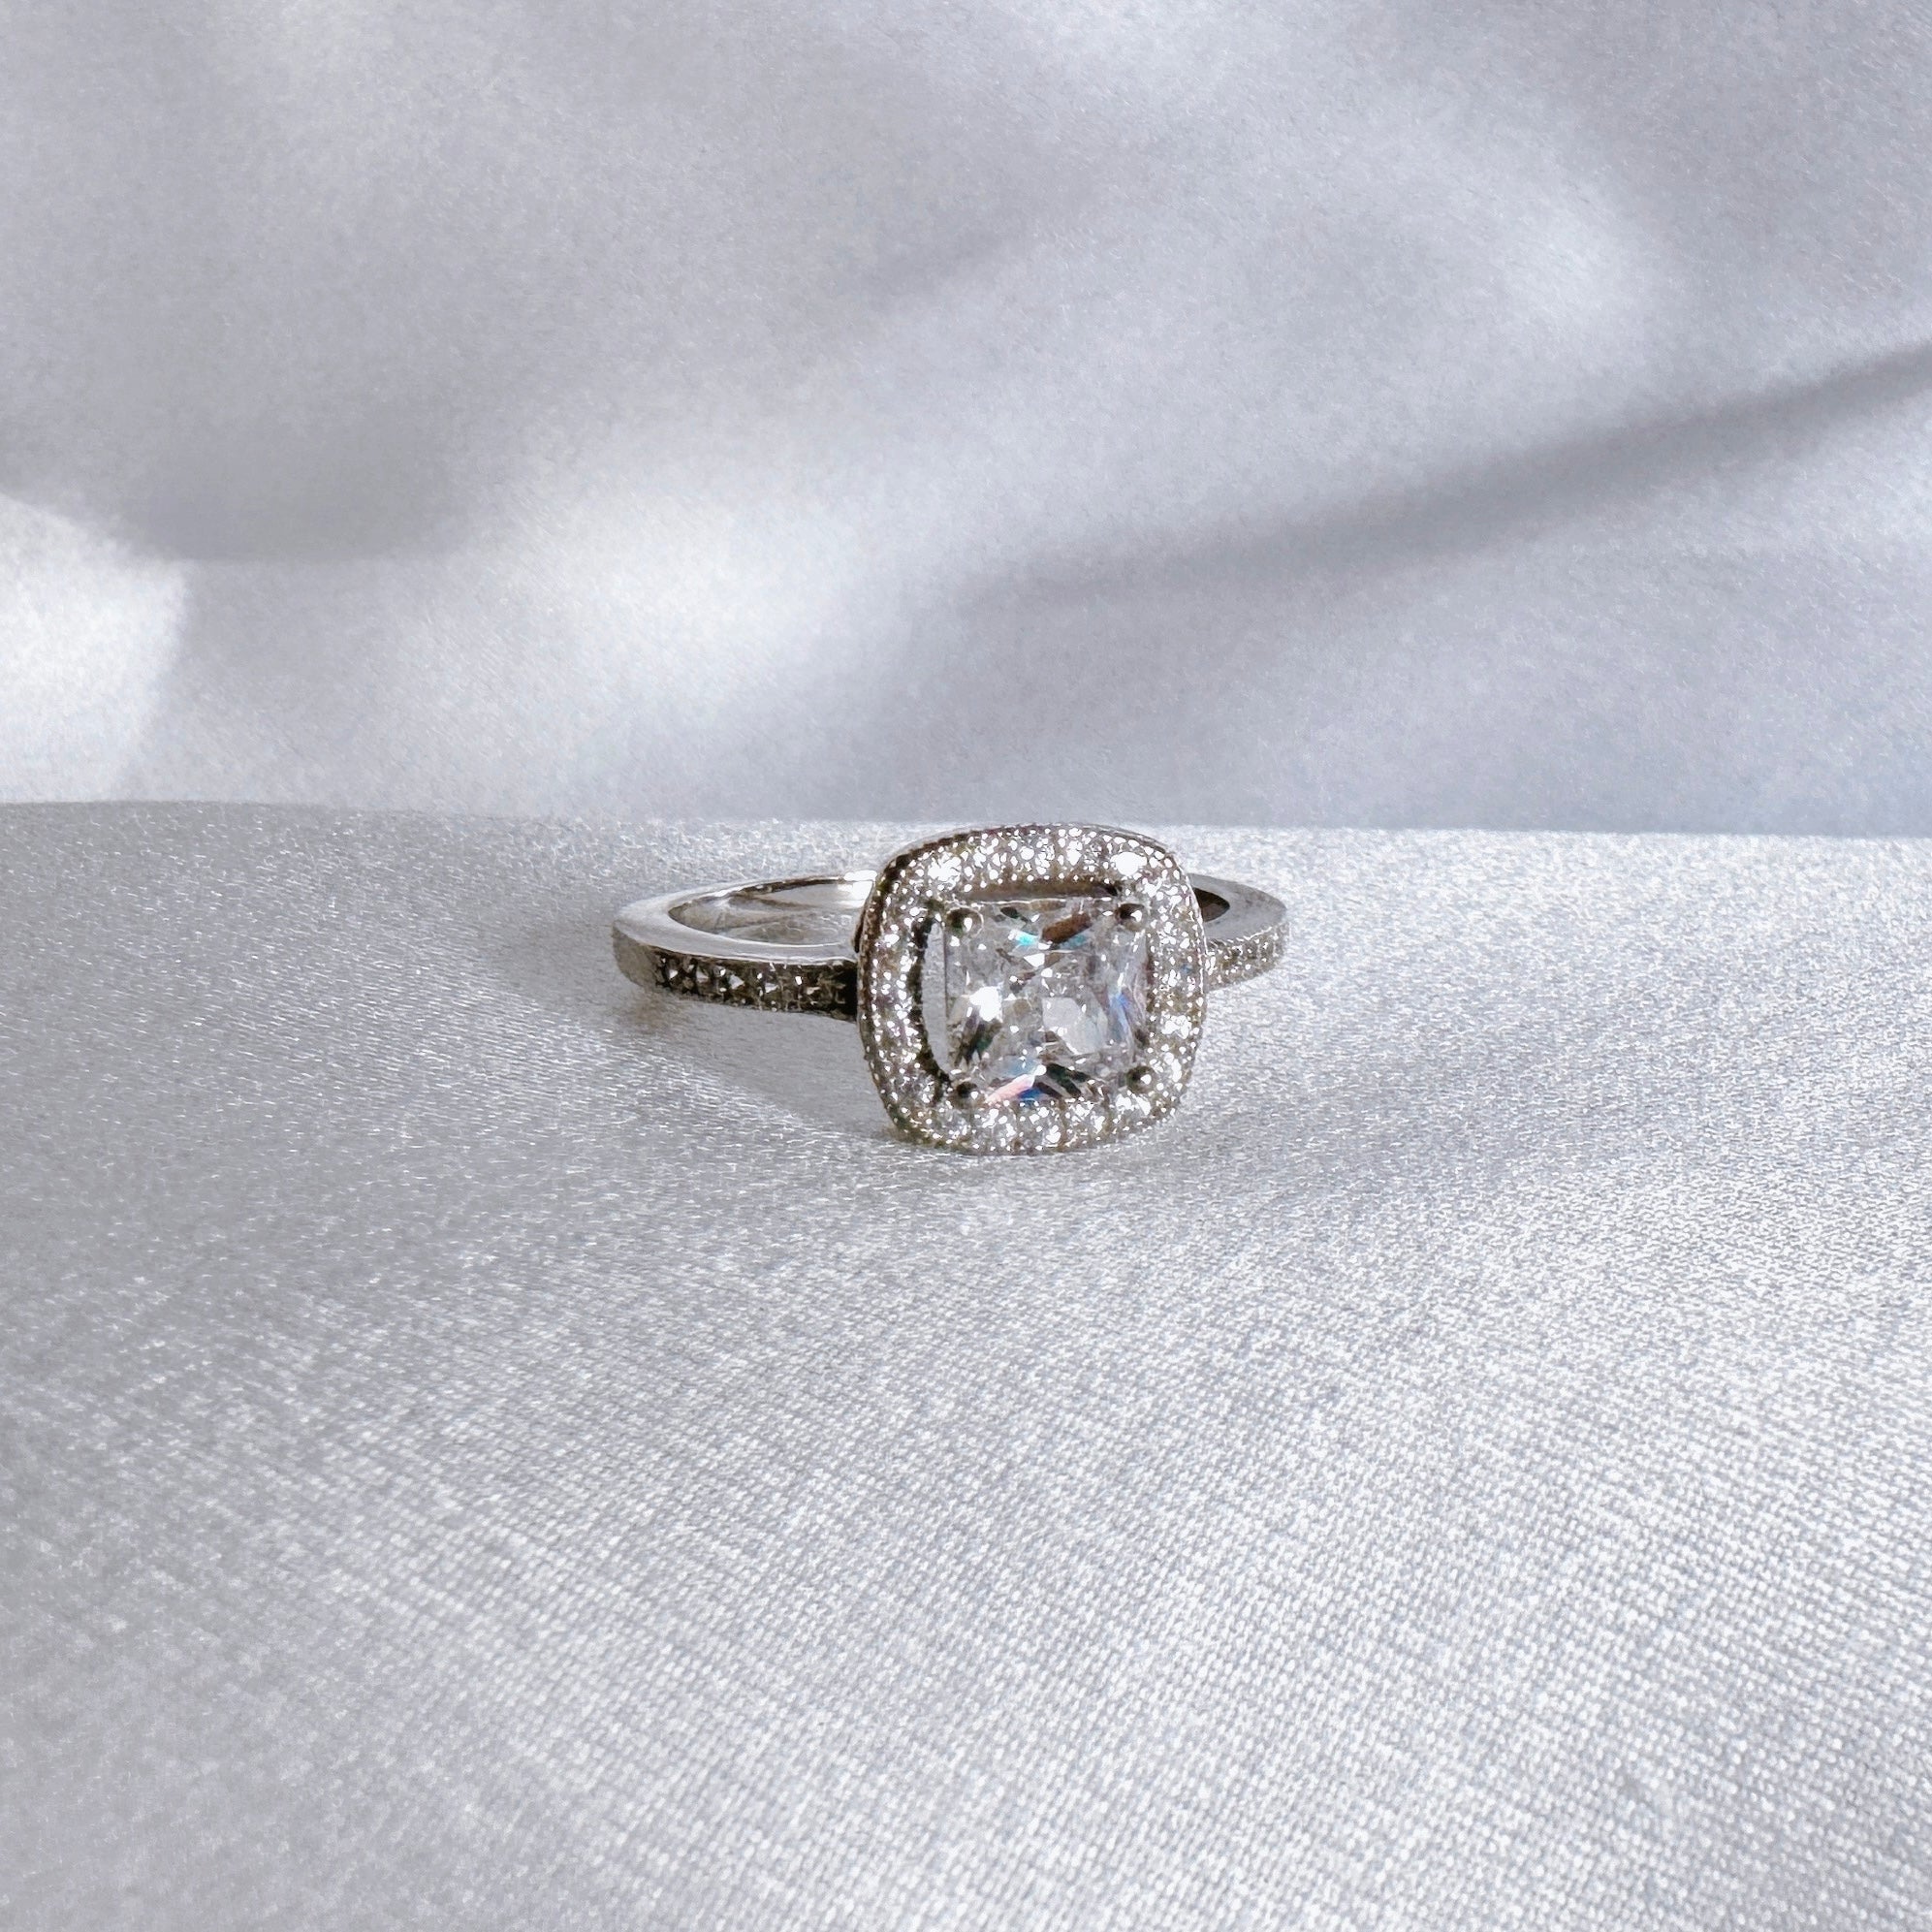 925 silver “Square Solitaire” ring